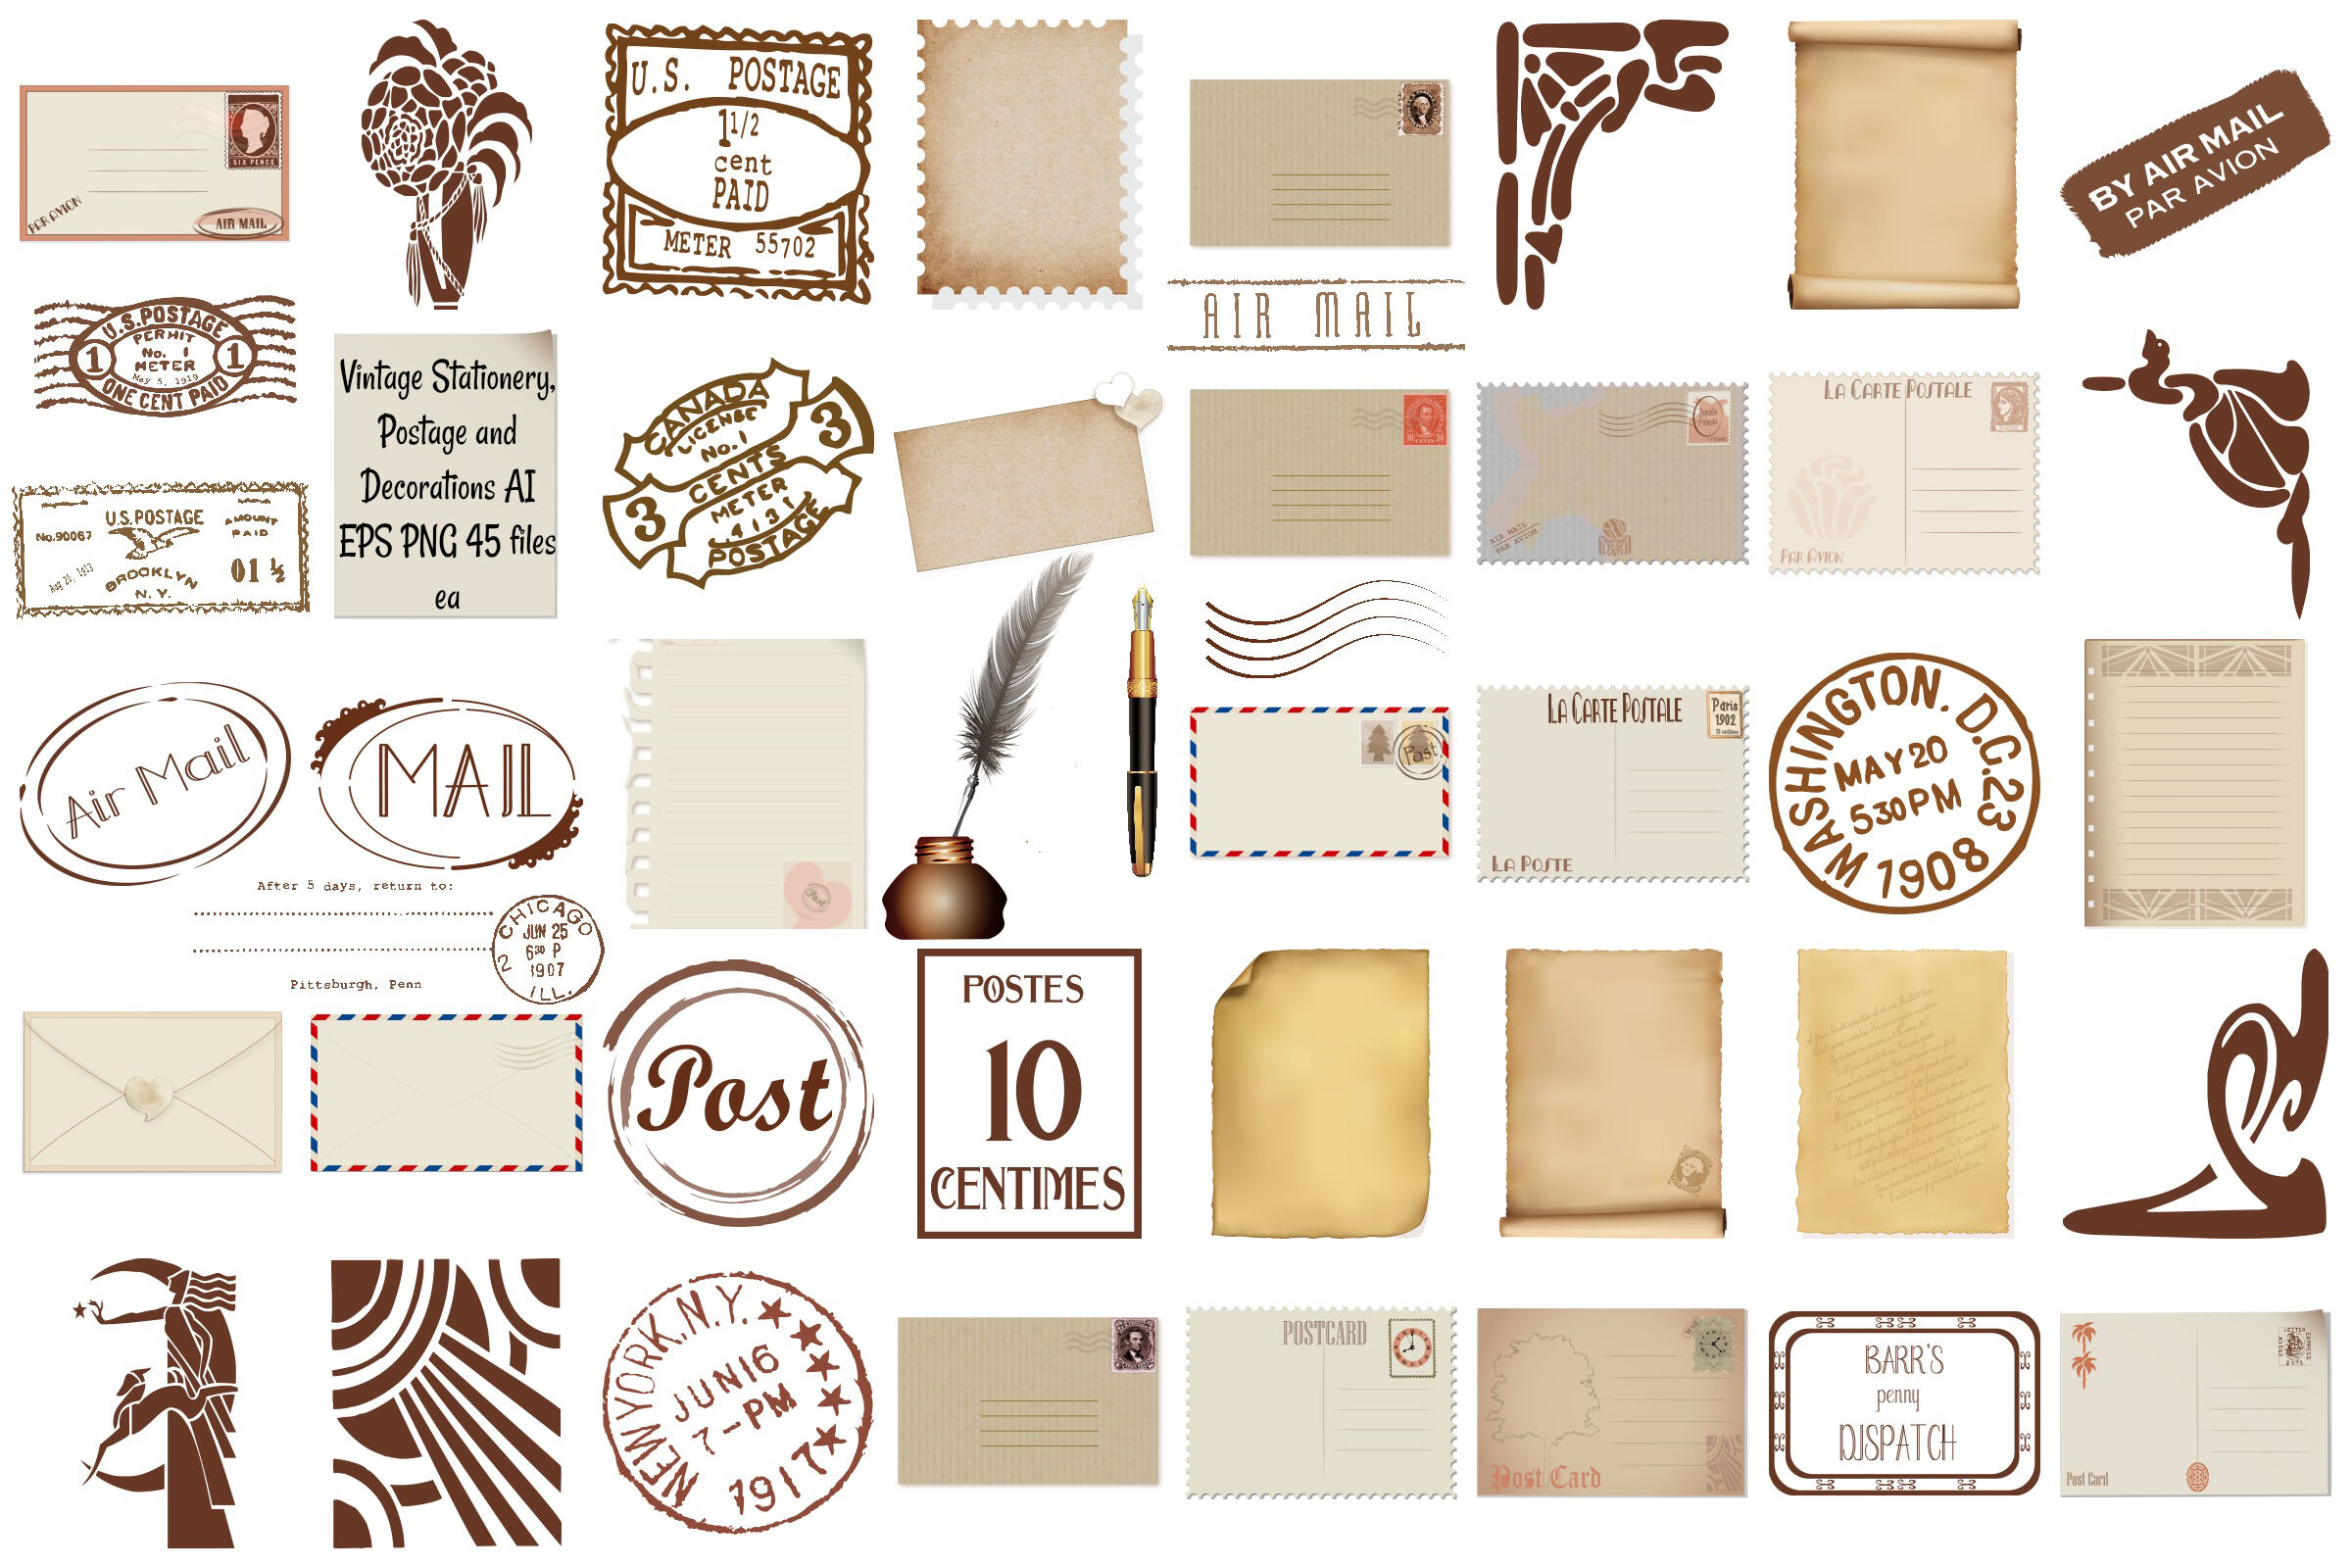 Vintage Stationery, Postage and Elements AI EPS PNG By Me and Ameliè